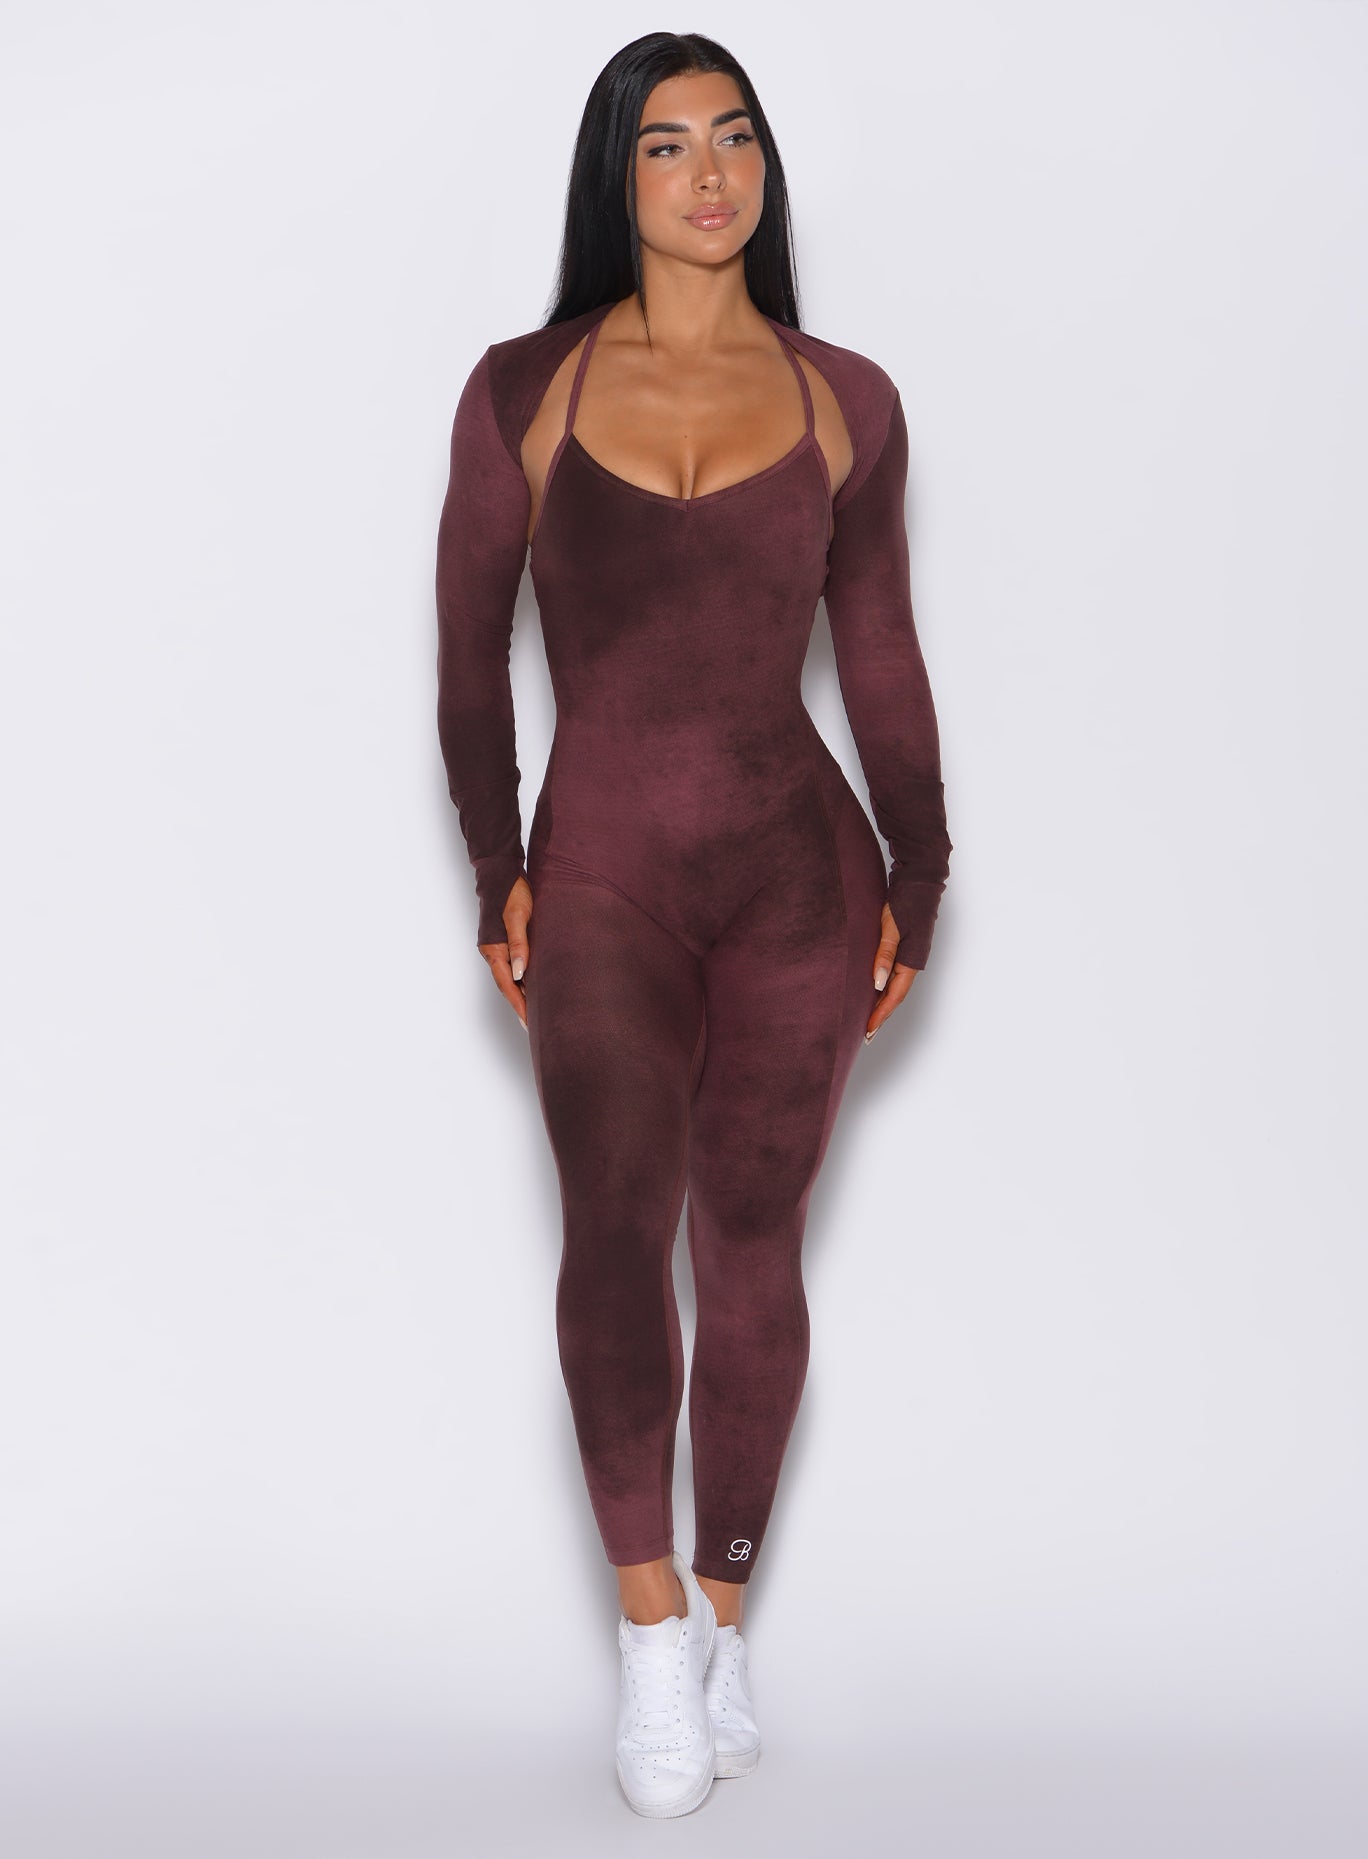 Front profile view of a model in our Sculpt Bodysuit in Vintage Port color along with the matching shape shrug